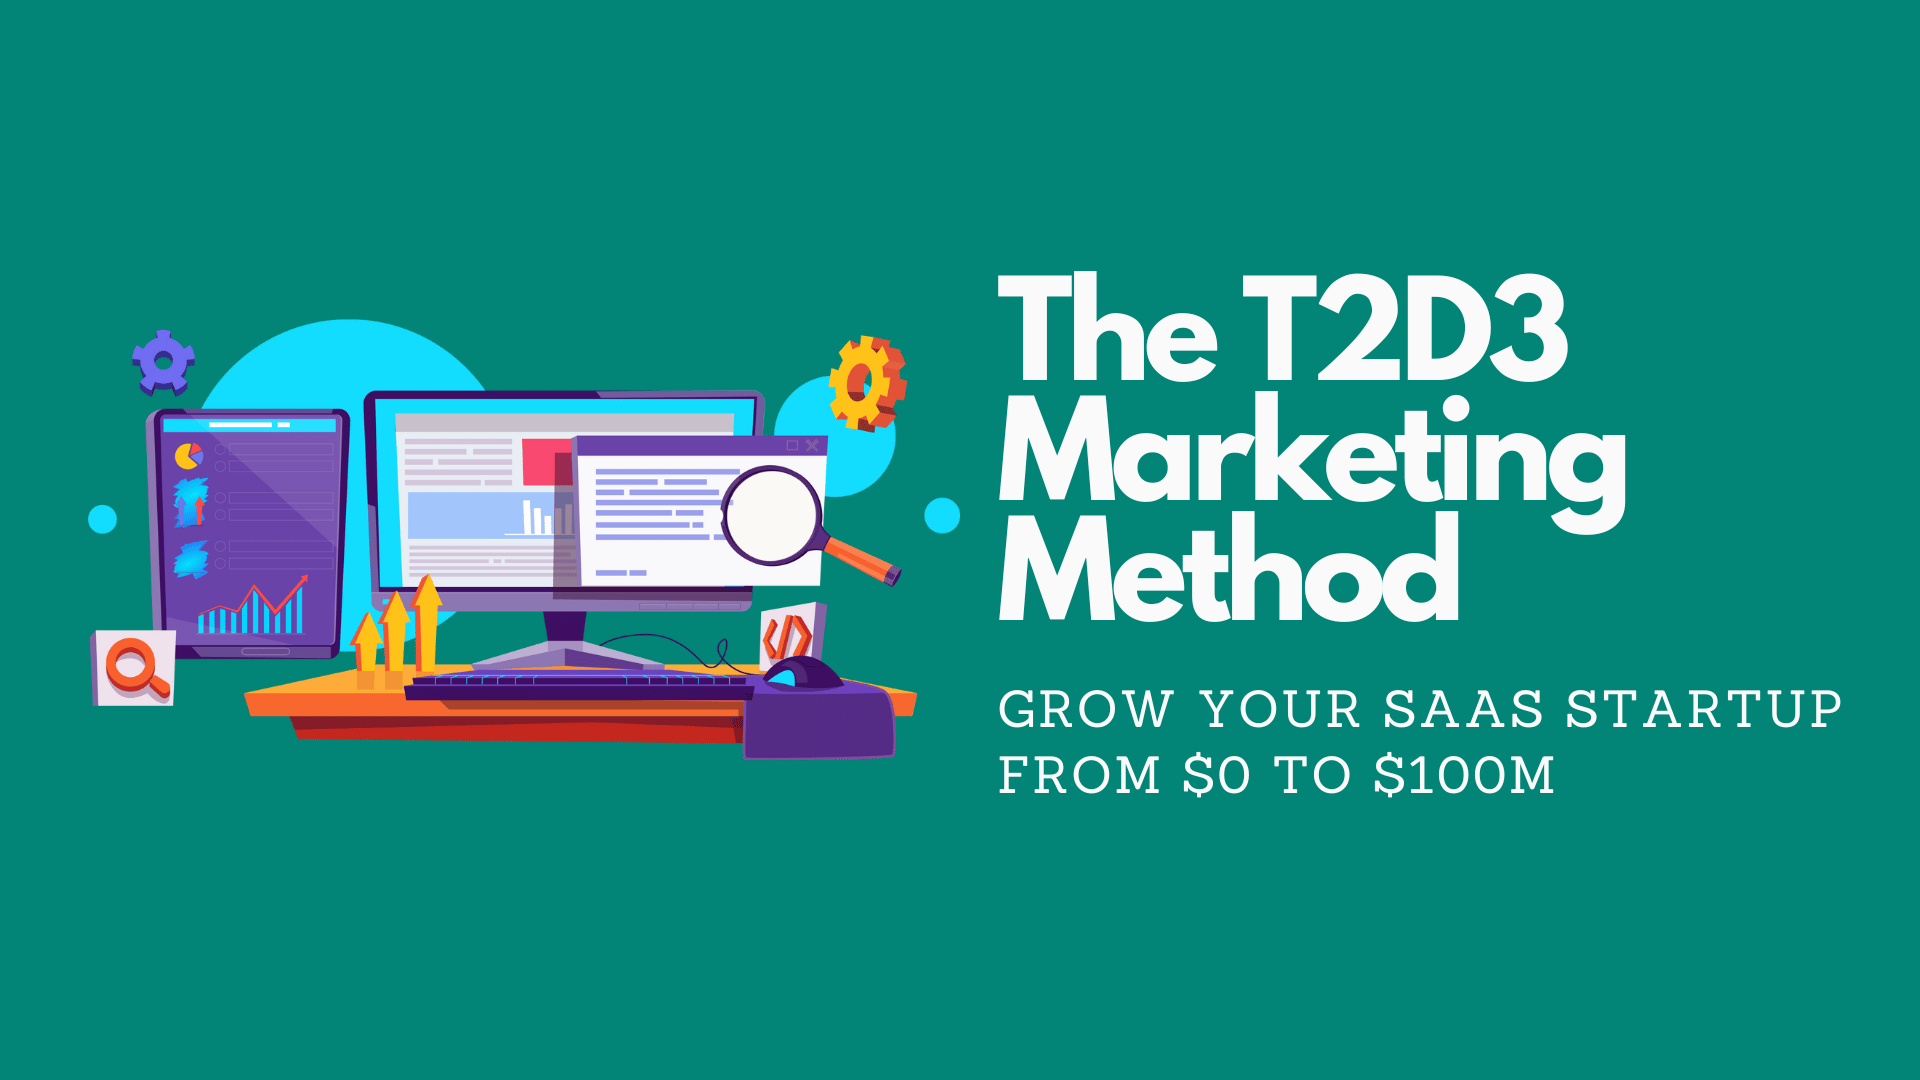 Navigating SaaS Growth: Implementing the T2D3 Marketing Method to go from MVP to $100M ARR